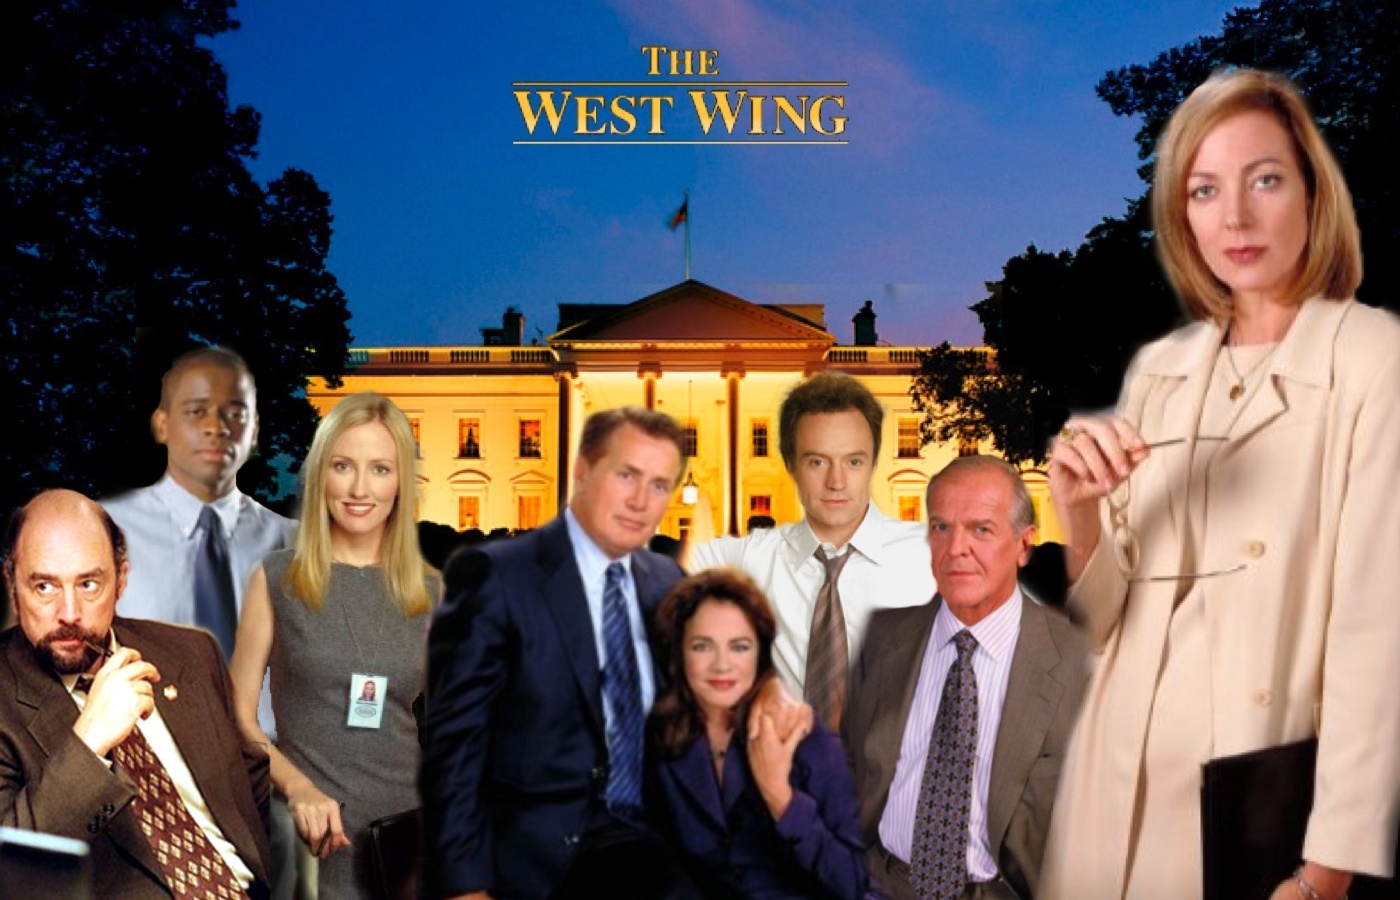 jeff-dodge-tv-show-review-roundup-the-west-wing-season-1-the